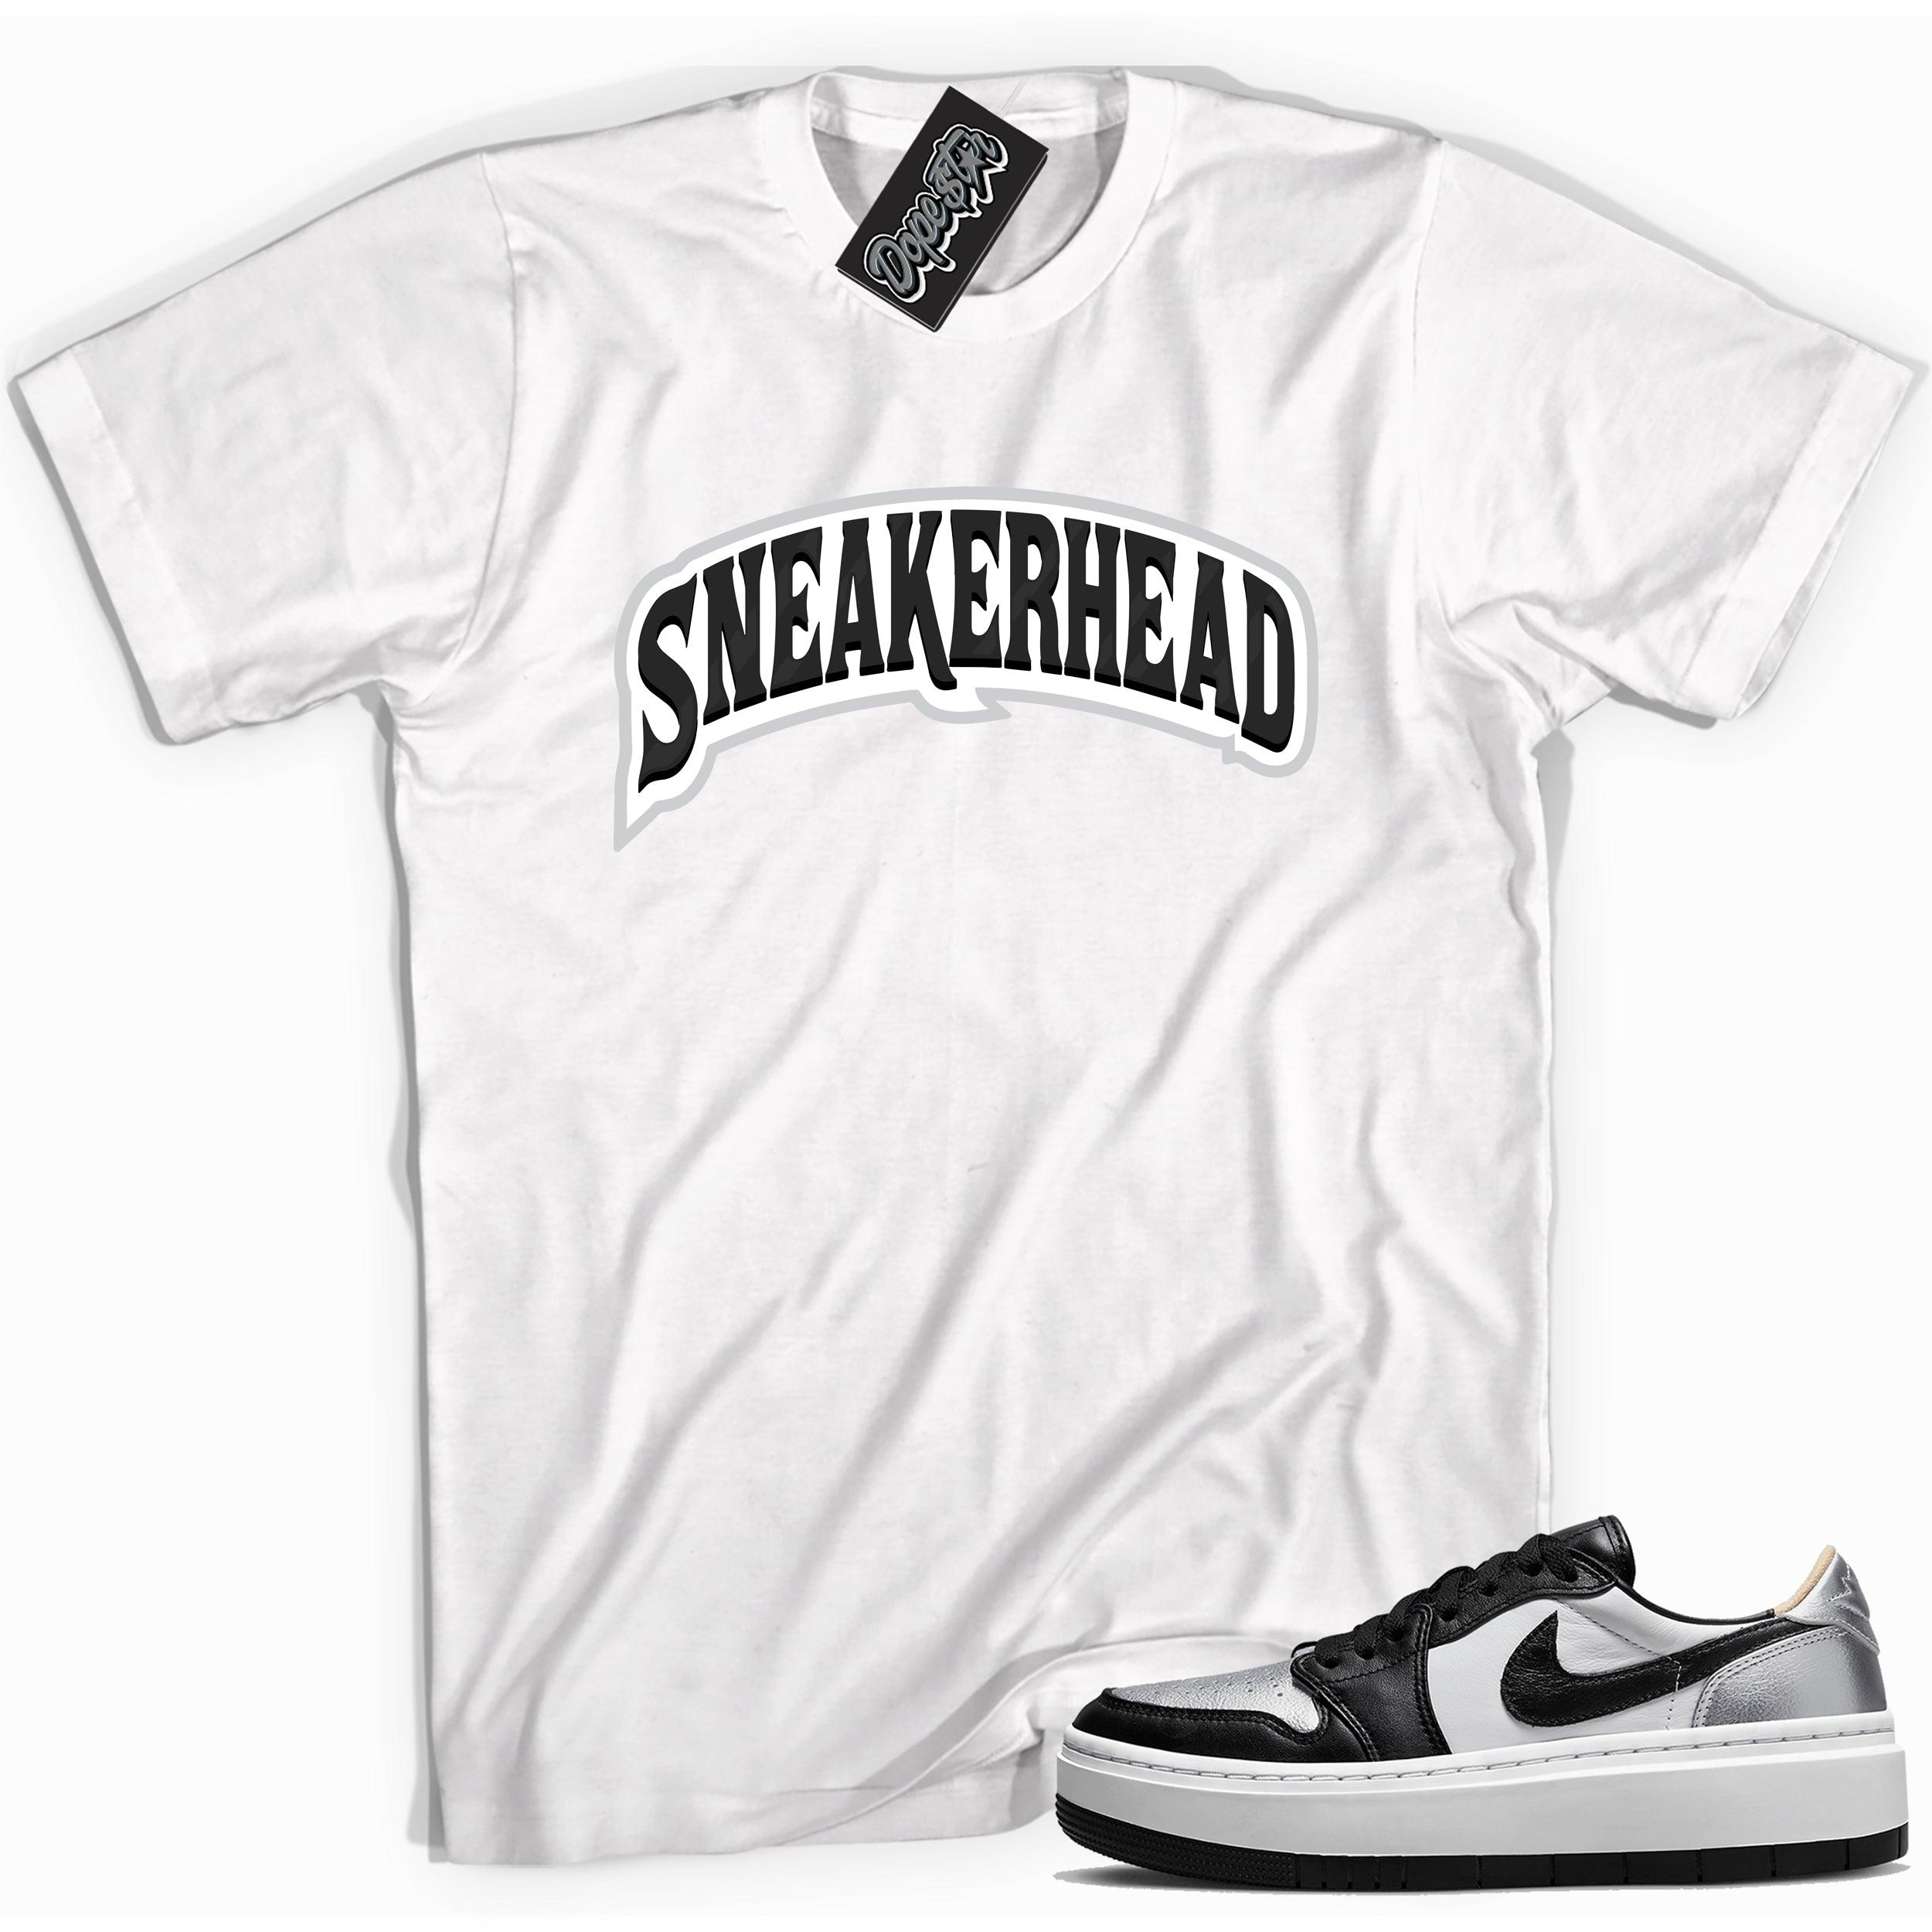 Cool white graphic tee with 'sneakerhead' print, that perfectly matches Air Jordan 1 Elevate Low SE Silver Toe sneakers.